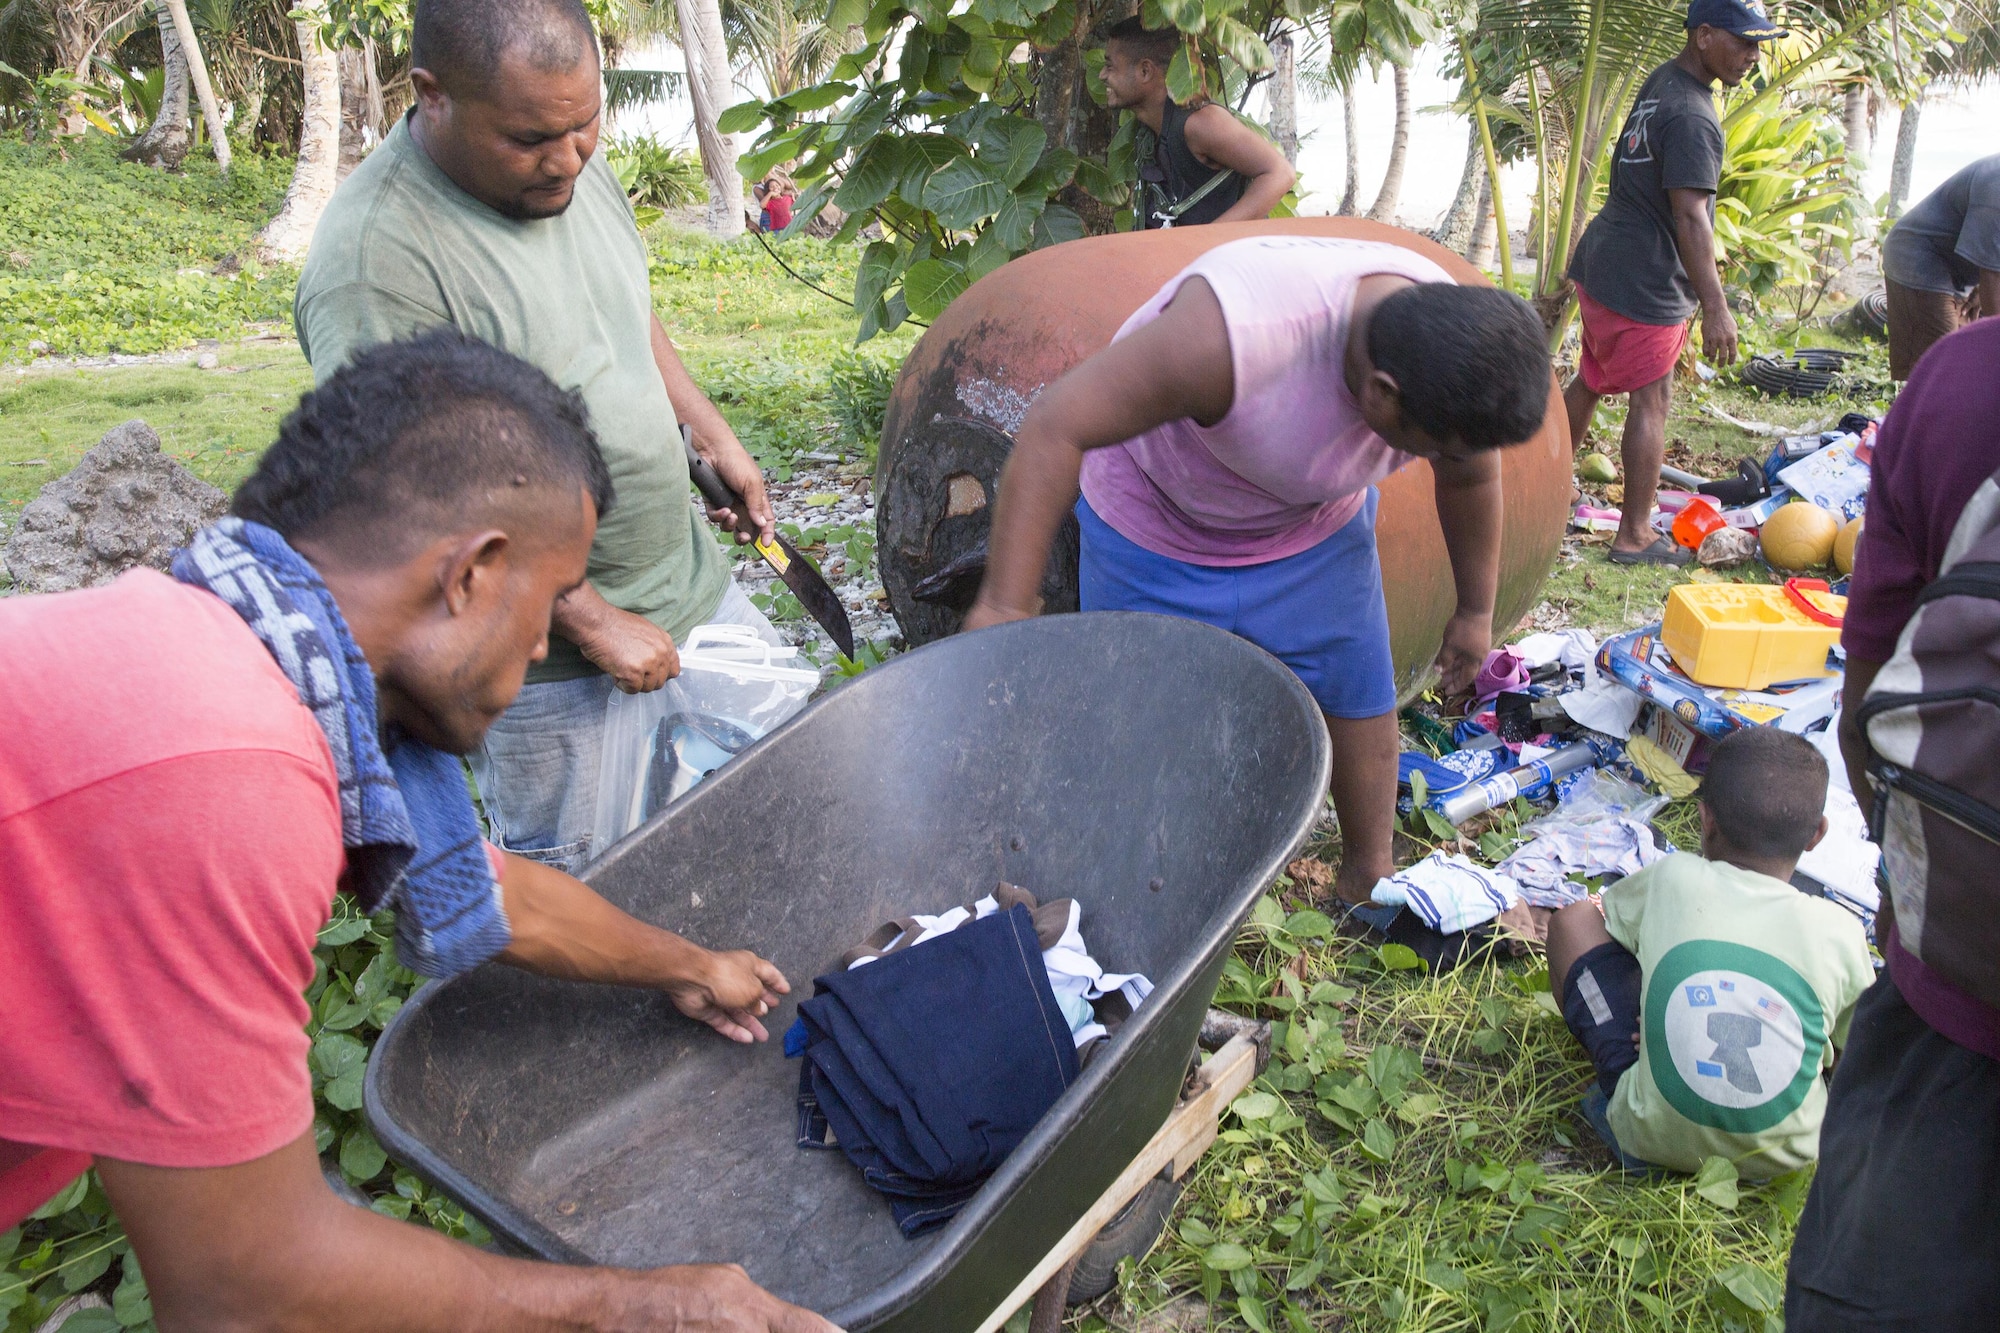 Villages load and sort the donated supplies that were dropped during Operation Christmas Drop 2015, Dec. 8, 2015, at Fais Island, Federated States of Micronesia. Operation Christmas Drop is a humanitarian/disaster relief training event where C-130 crews provide critical supplies to 56 islands throughout the Commonwealth of the Northern Marianas, Federated States of Micronesia and Republic of Palau. This year marks the first ever trilateral execution that includes air support from the U.S. Air Force, Japan Air Self-Defense Force and the Royal Australian Air Force. (U.S. Air Force photo by Osakabe Yasuo/Released)